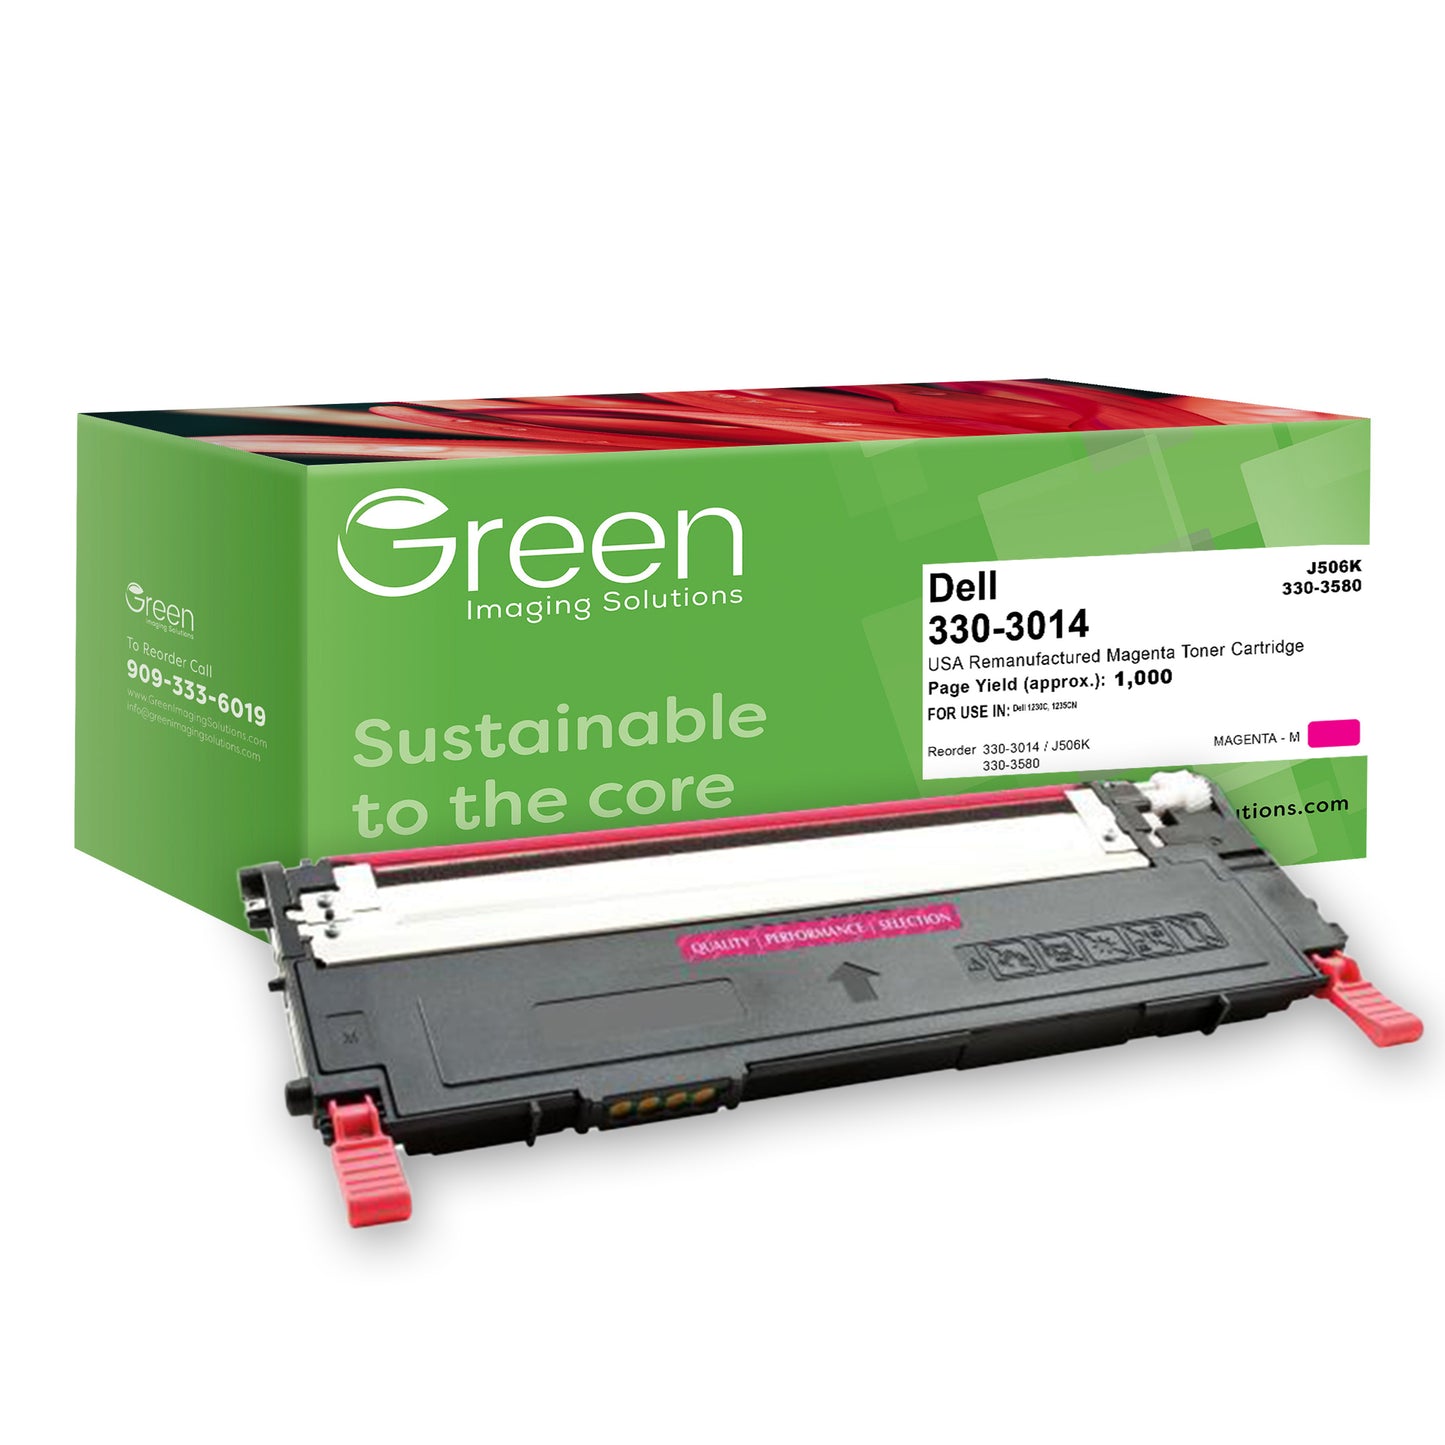 Green Imaging Solutions USA Remanufactured Magenta Toner Cartridge for Dell 1230/1235